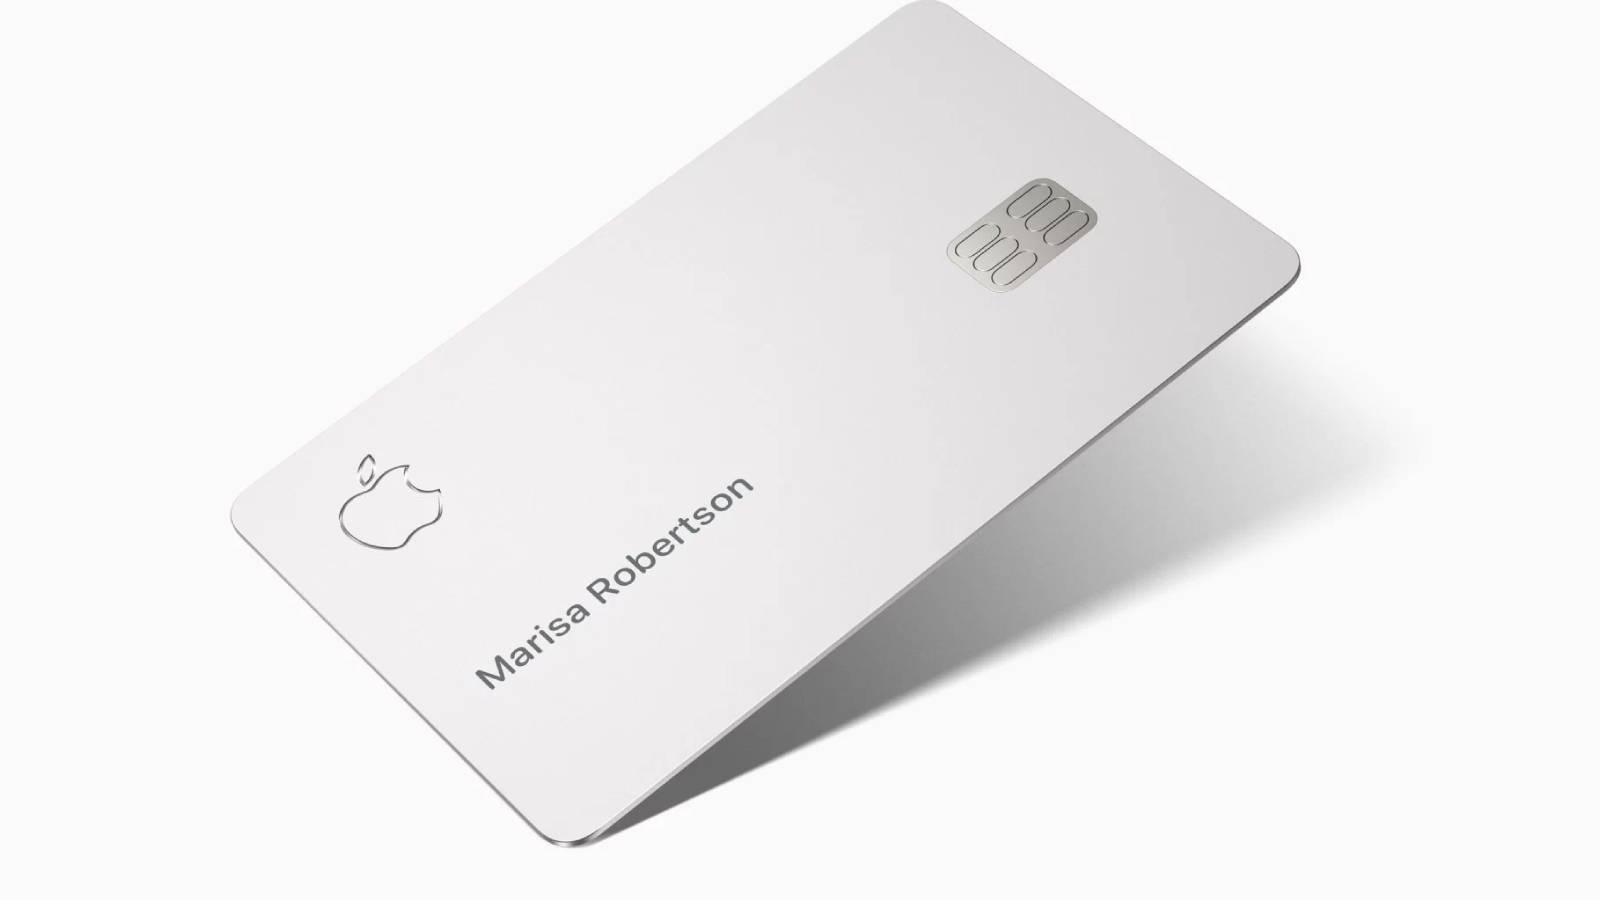 The Apple Credit Card will launch next month